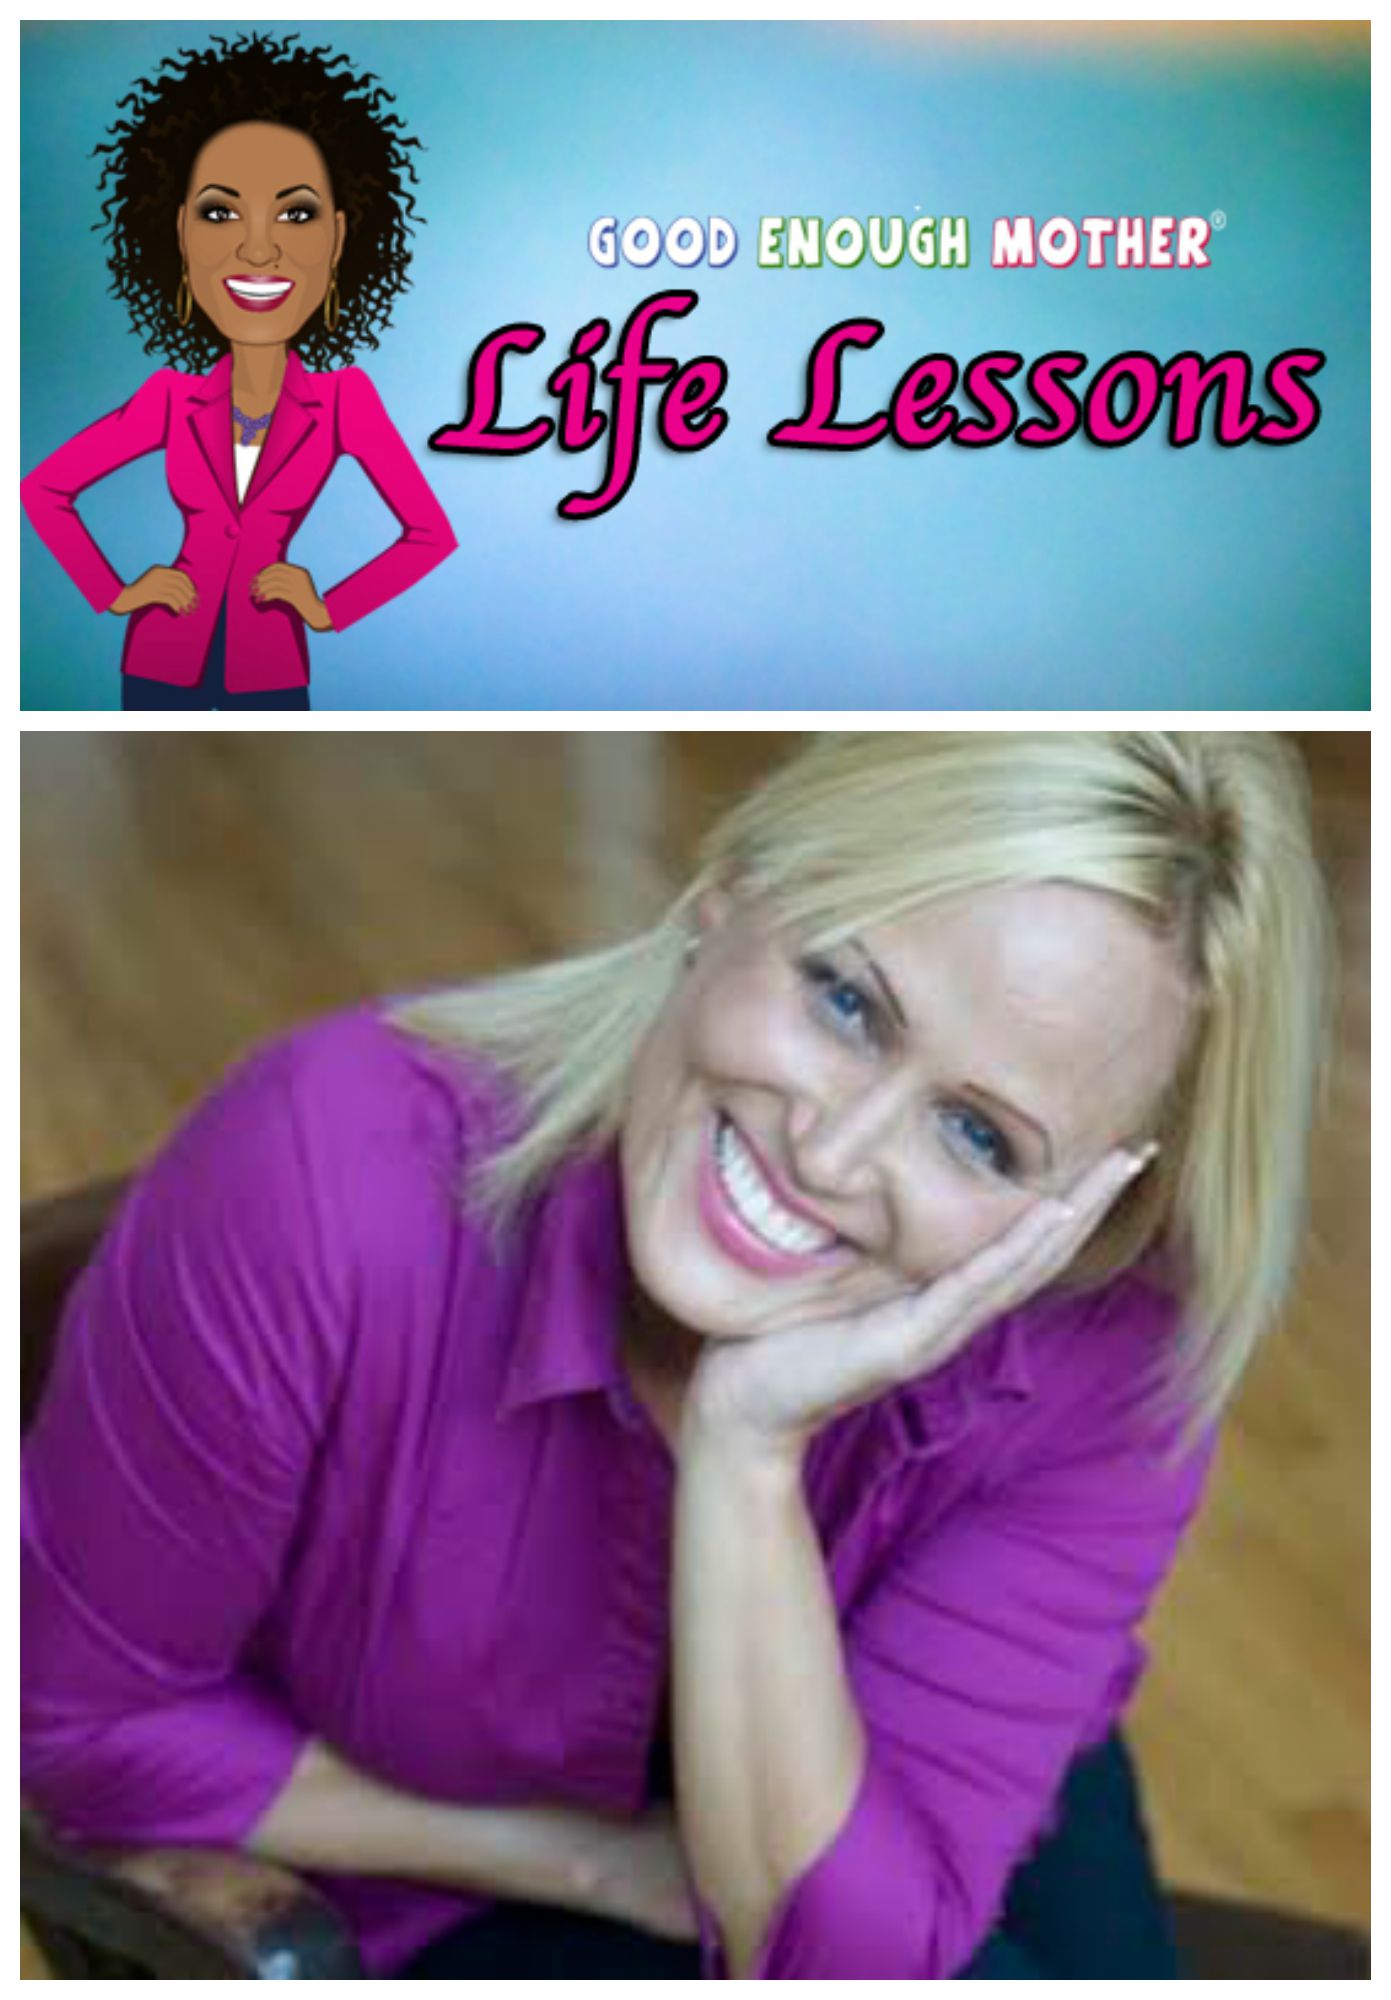 Life Lessons: Andrea Page